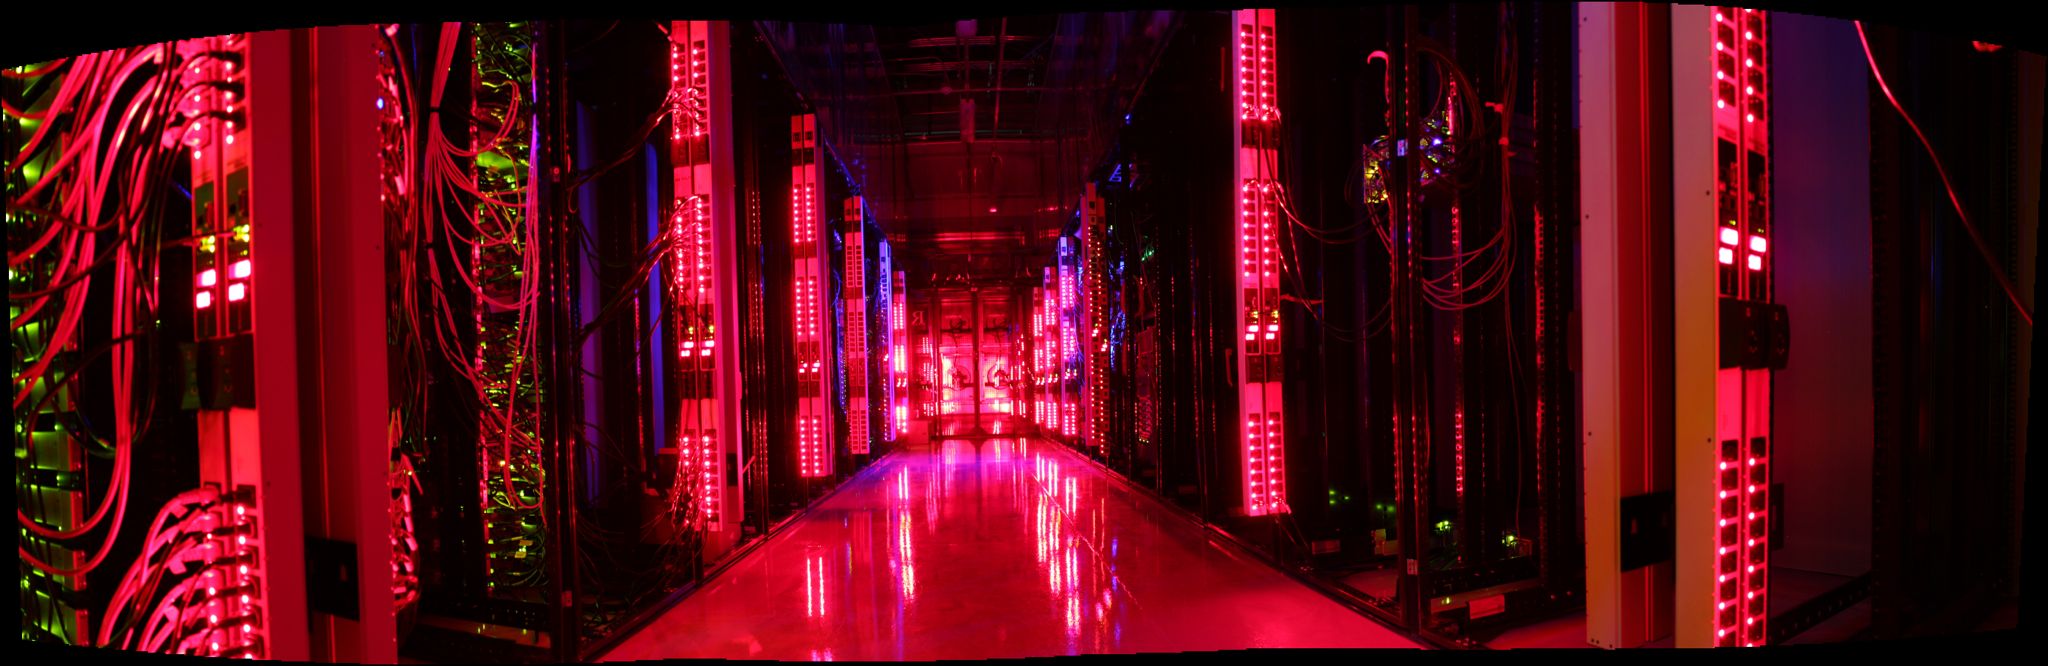 This is the Center for High Performance Computing's area of the University of Utah's Downtown Data Center. Photo by Sam Liston